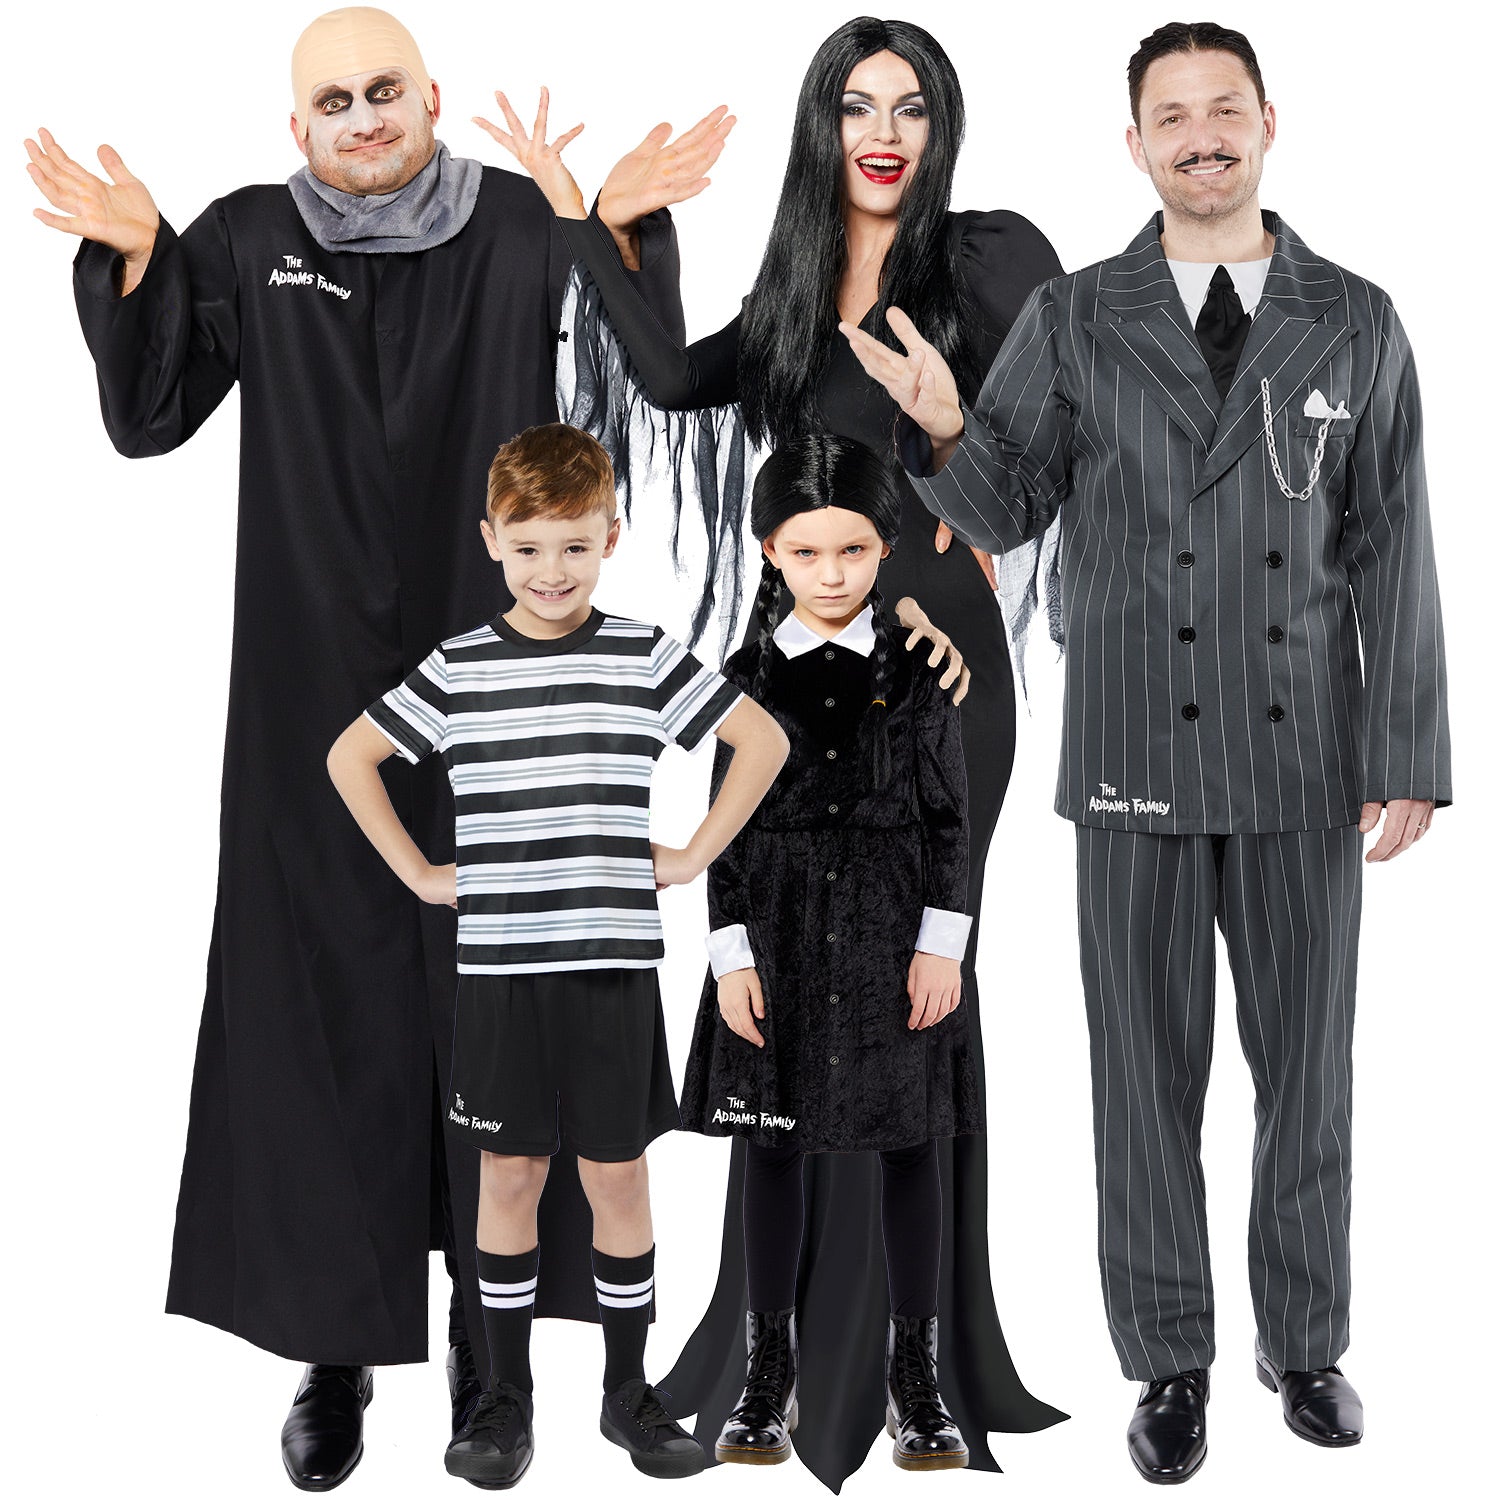 Costume The Addams Family Wednesday Woman